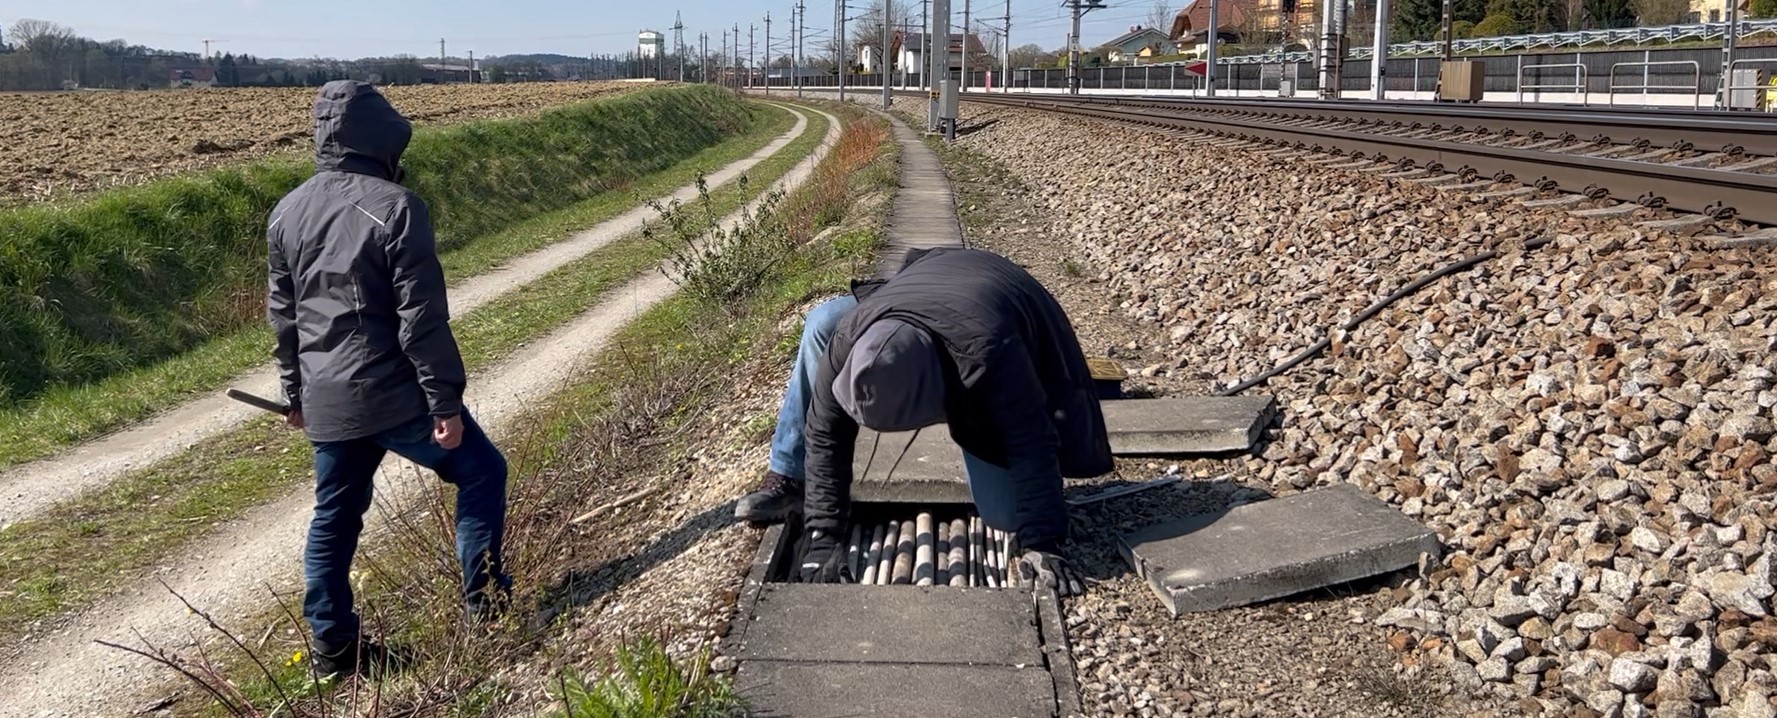 How to Secure Railway Infrastructure from Vandalism, Theft, and Terrorism